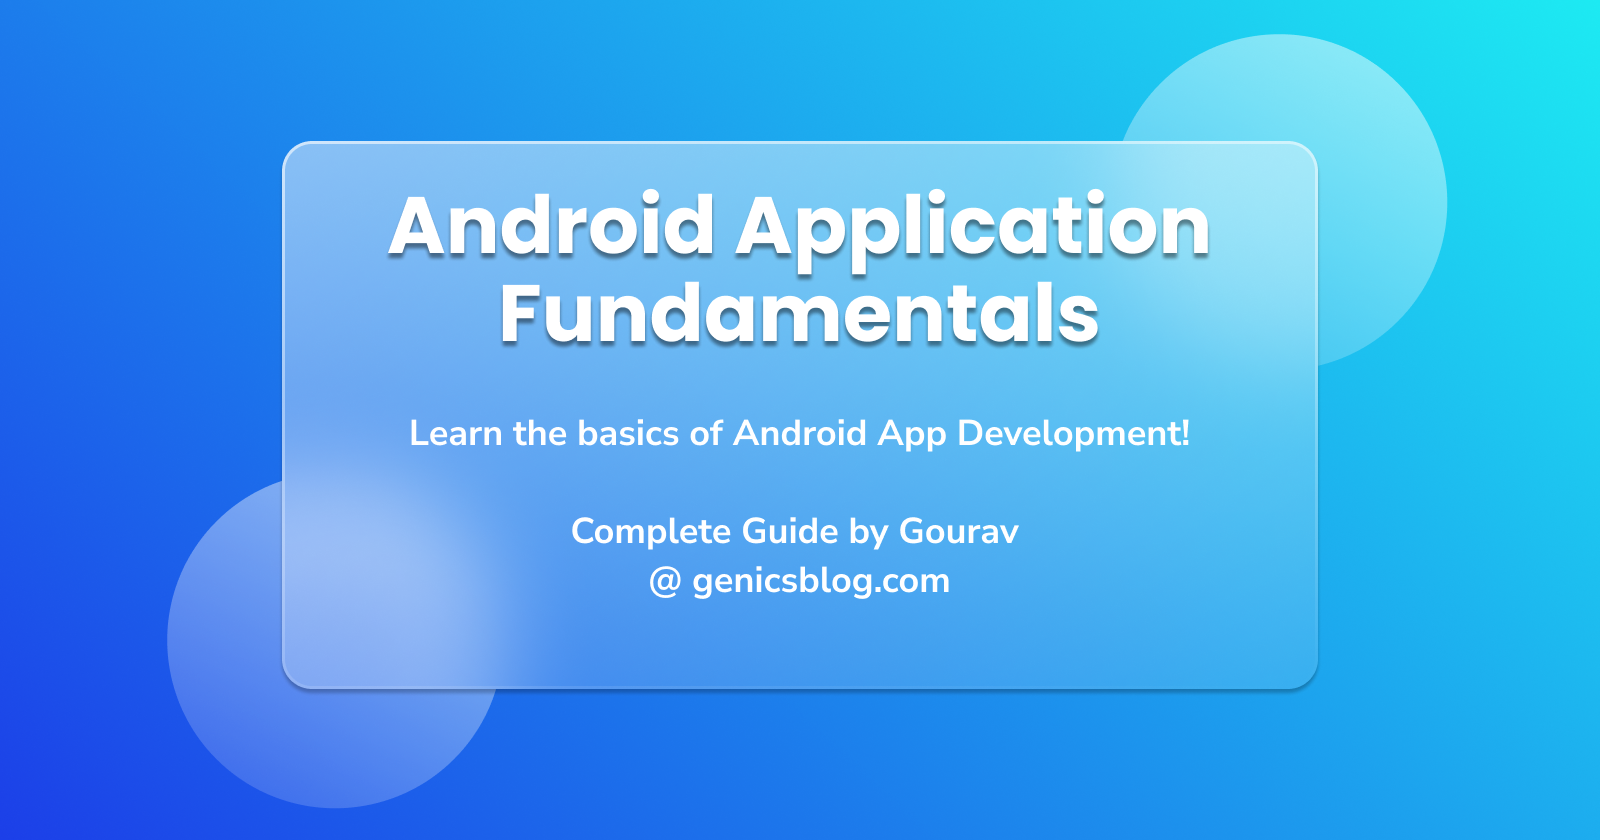 Android Application Fundamentals - Understand the bits and bytes